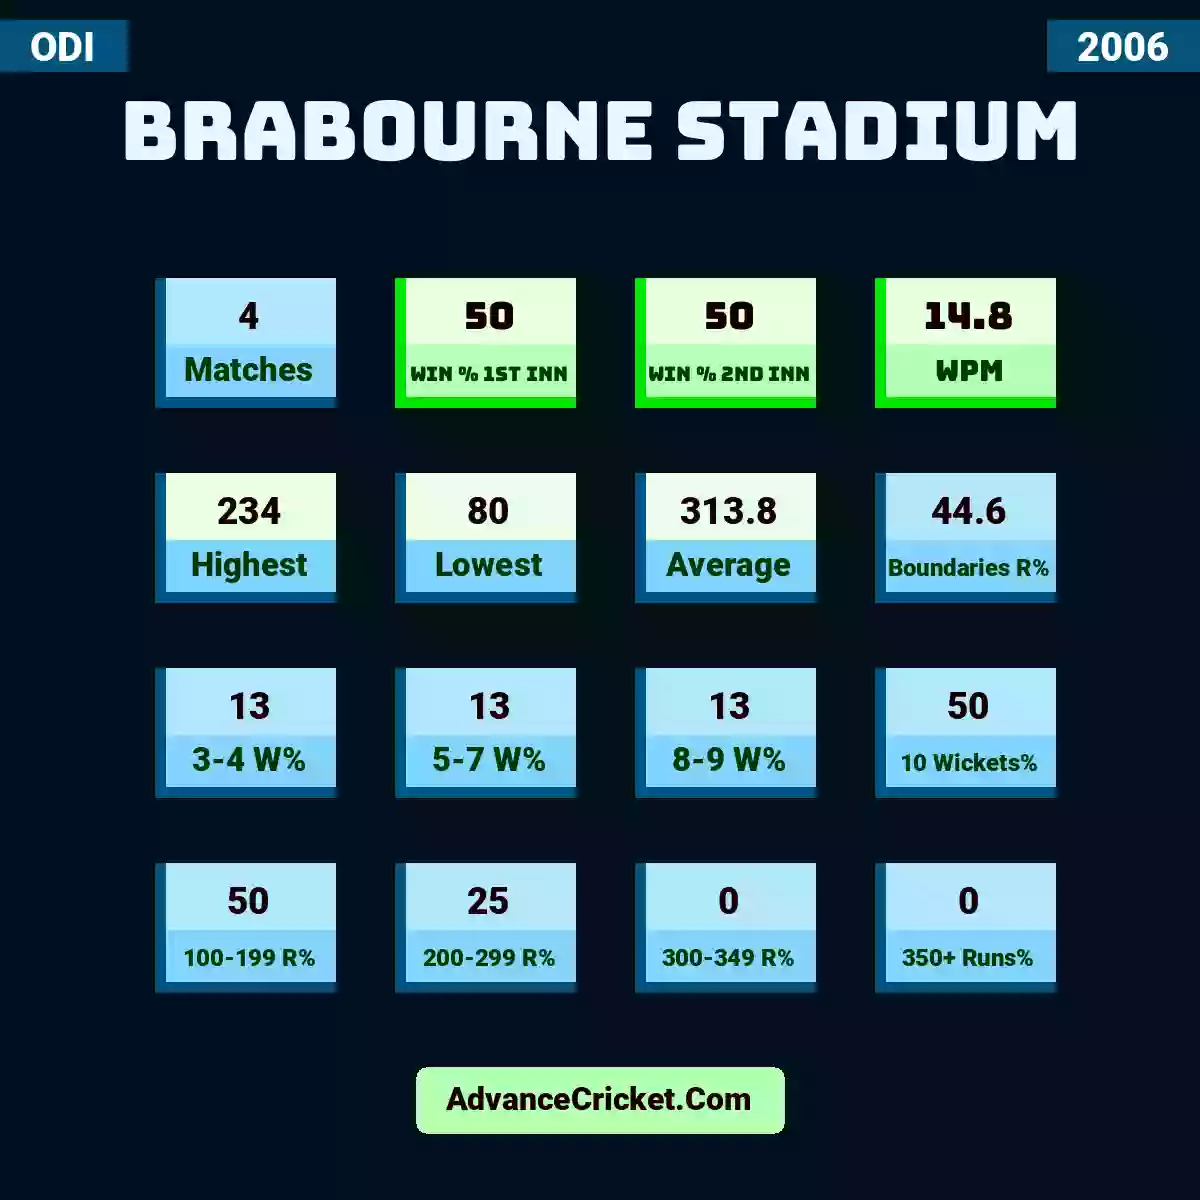 Image showing Brabourne Stadium with Matches: 4, Win % 1st Inn: 50, Win % 2nd Inn: 50, WPM: 14.8, Highest: 234, Lowest: 80, Average: 313.8, Boundaries R%: 44.6, 3-4 W%: 13, 5-7 W%: 13, 8-9 W%: 13, 10 Wickets%: 50, 100-199 R%: 50, 200-299 R%: 25, 300-349 R%: 0, 350+ Runs%: 0.